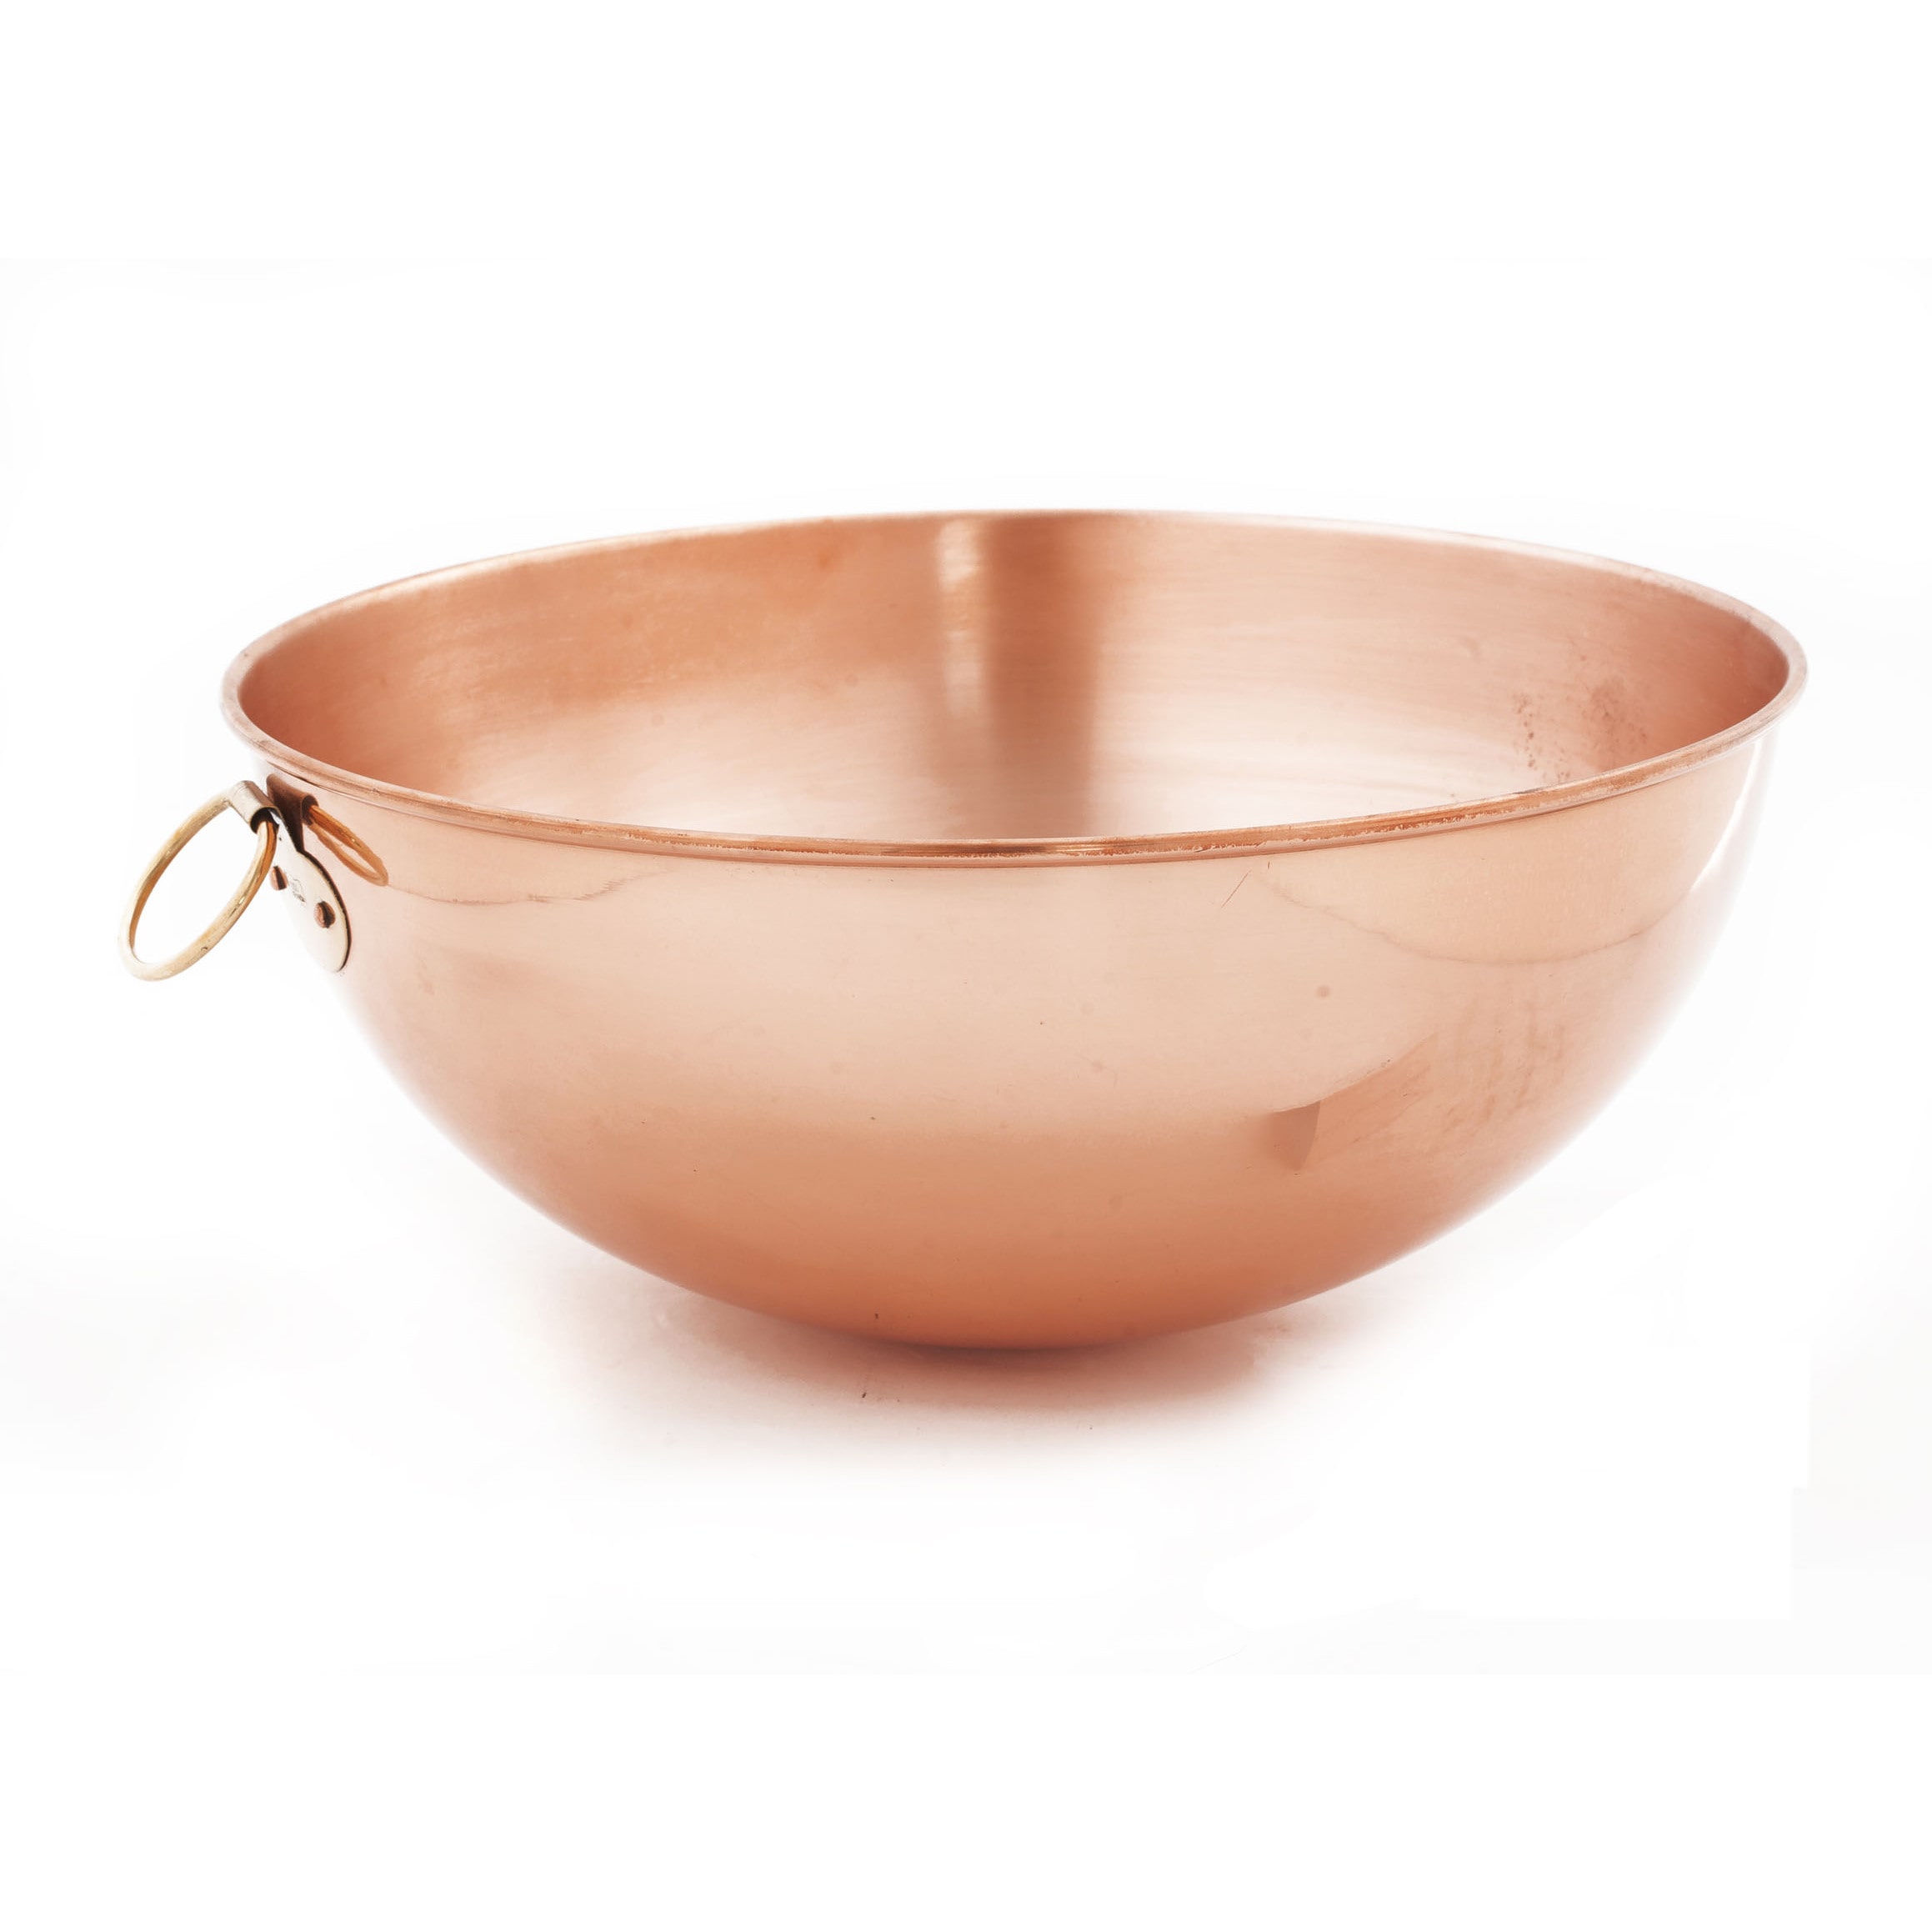 Old Dutch Solid Copper Beating Bowl - 5 qt. - image 3 of 3